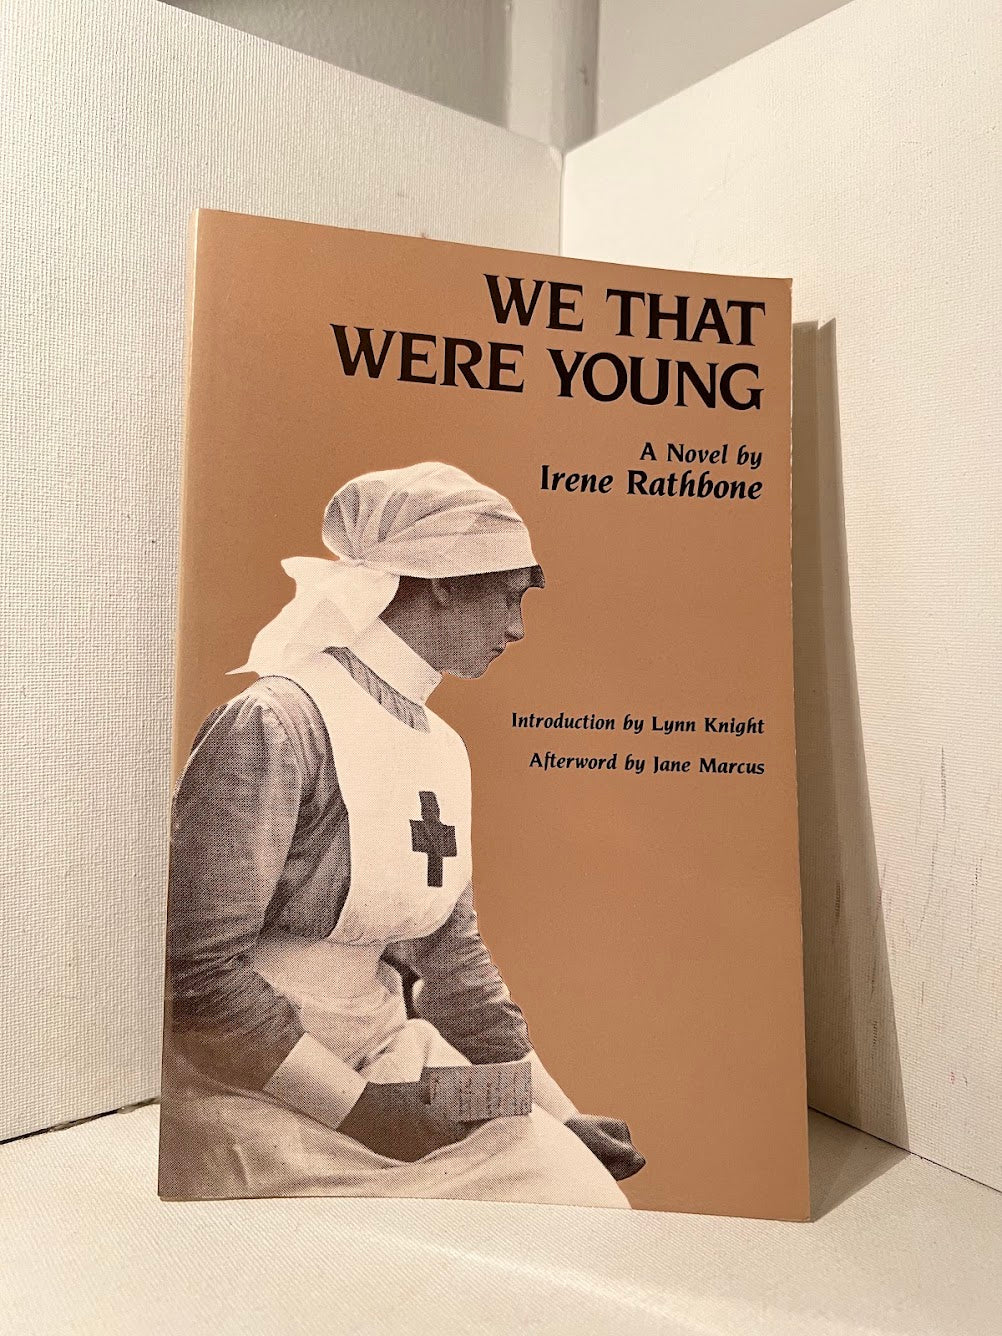 We That Were Young by Irene Rathbone